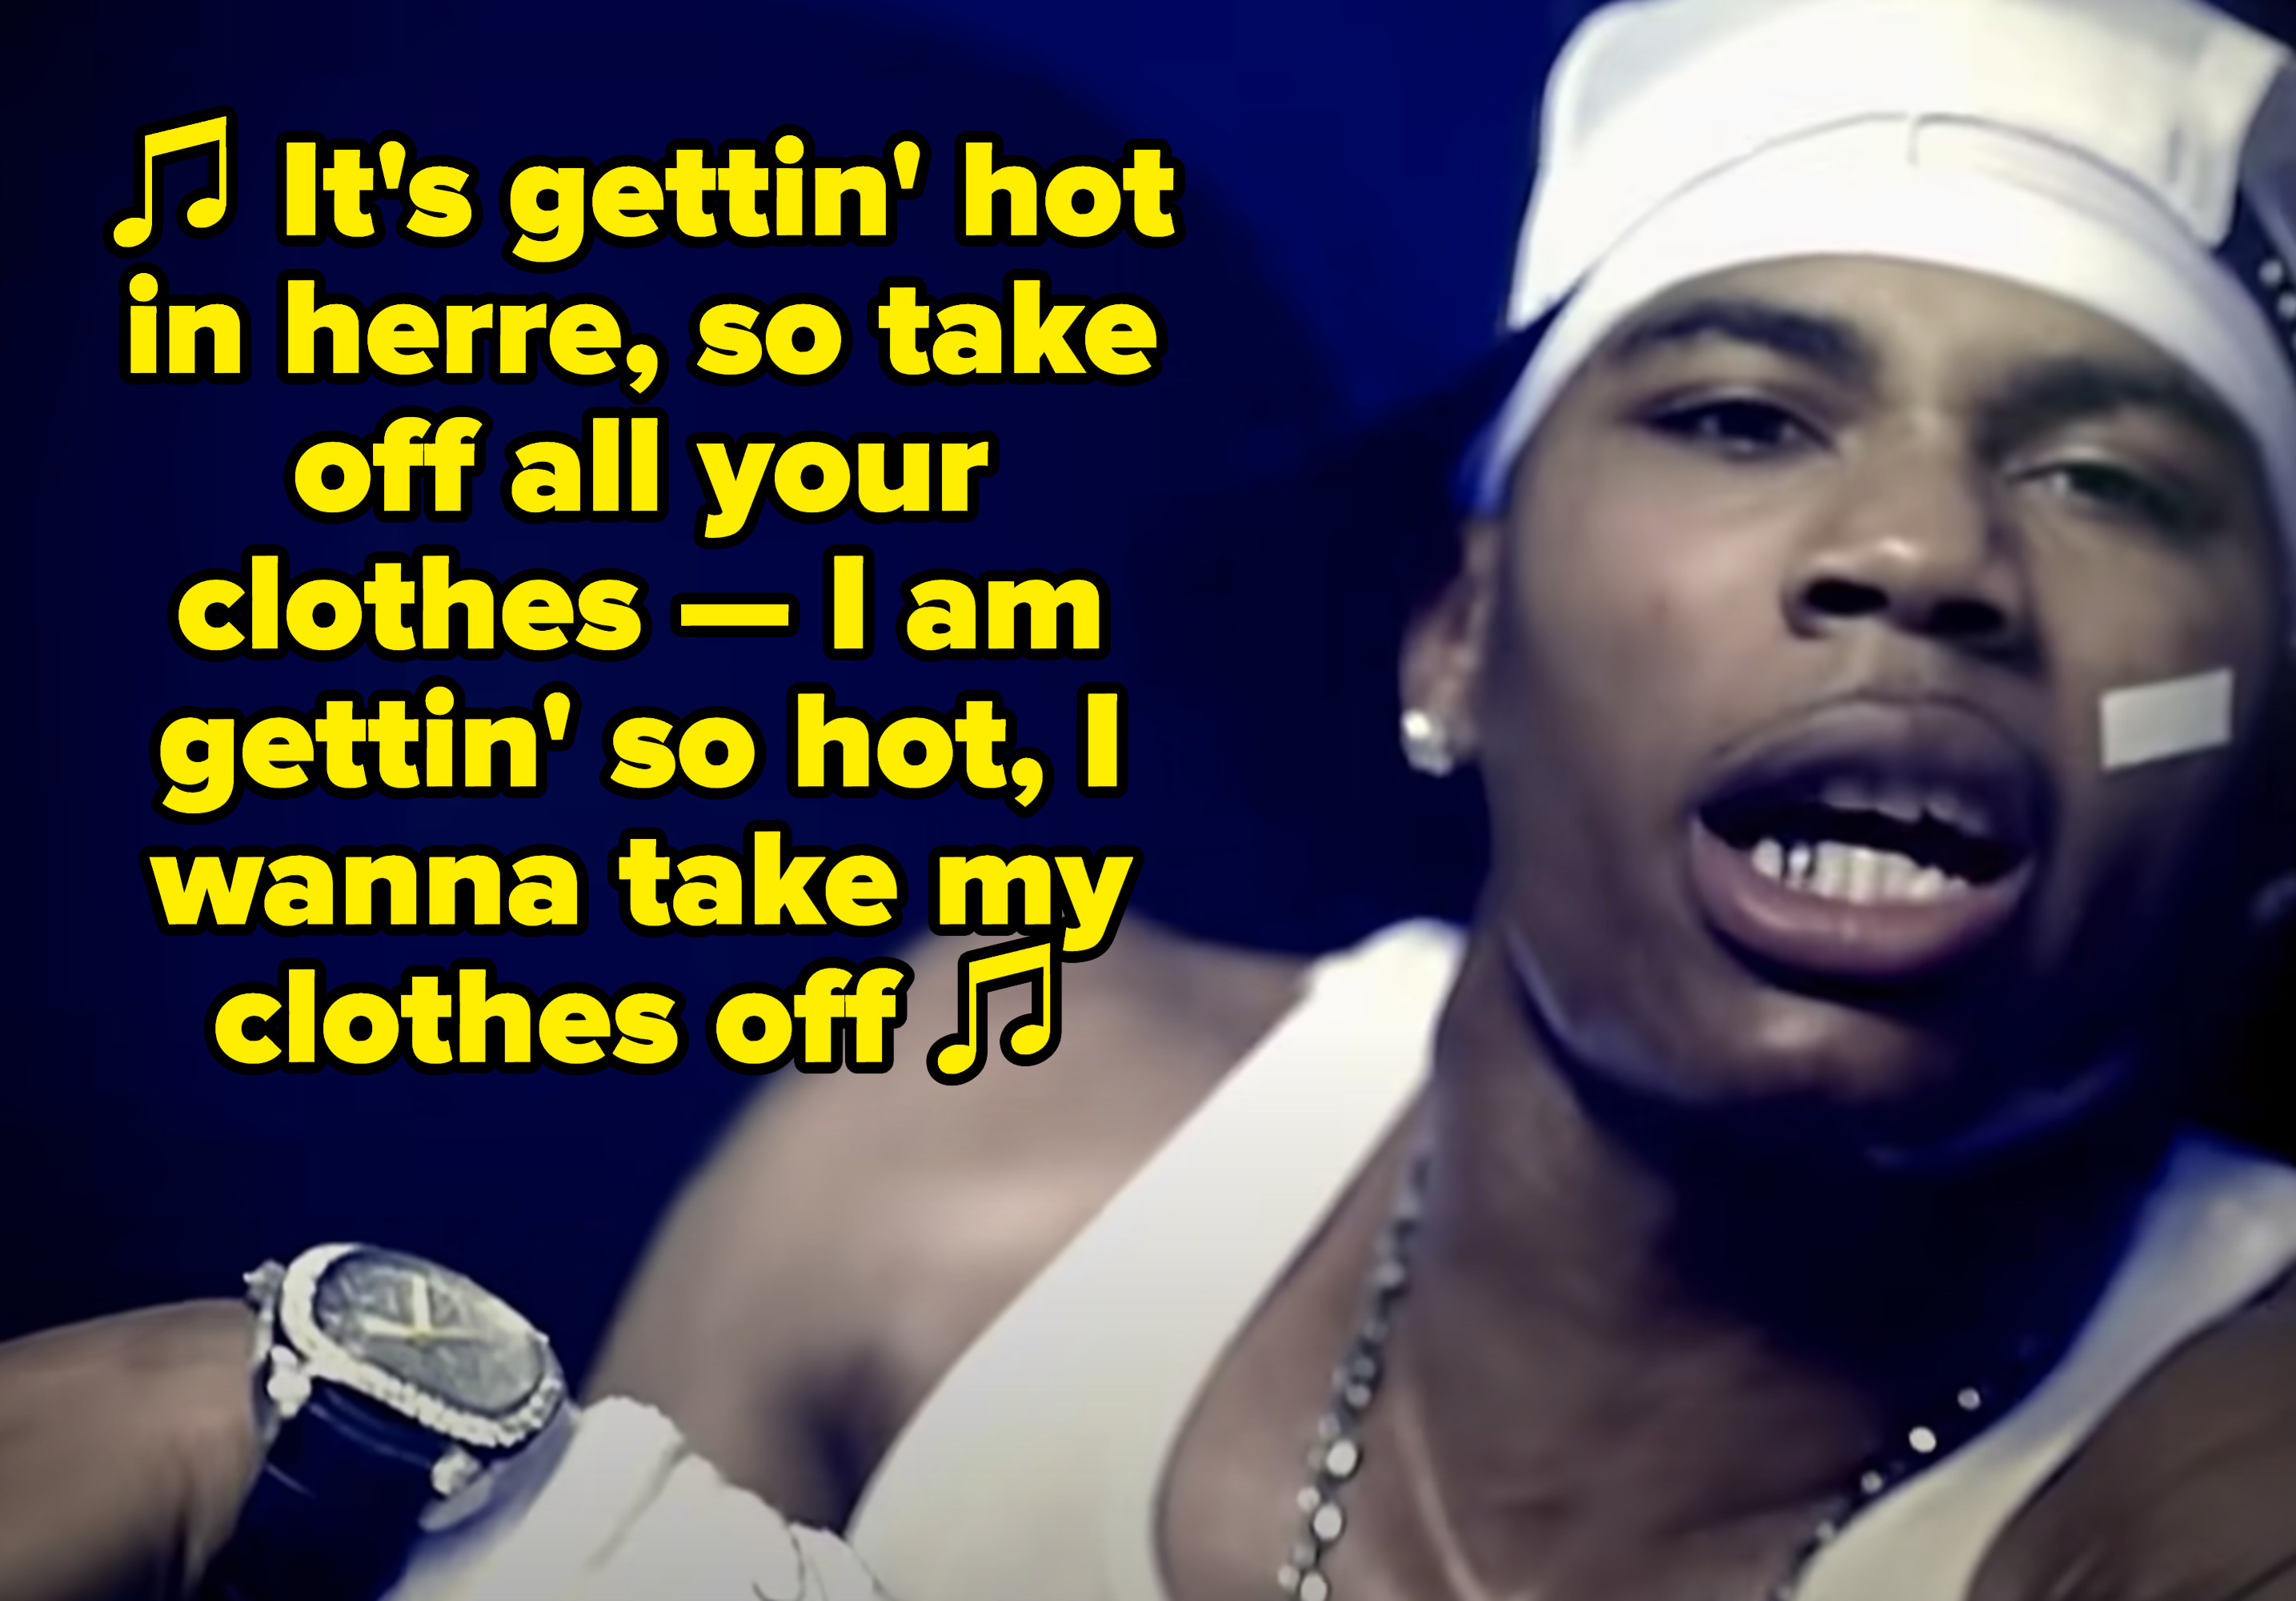 Nelly rapping: &quot;It&#x27;s gettin&#x27; hot in herre, so take off all your clothes -- I am gettin&#x27; so hot, I wanna take my clothes off&quot;